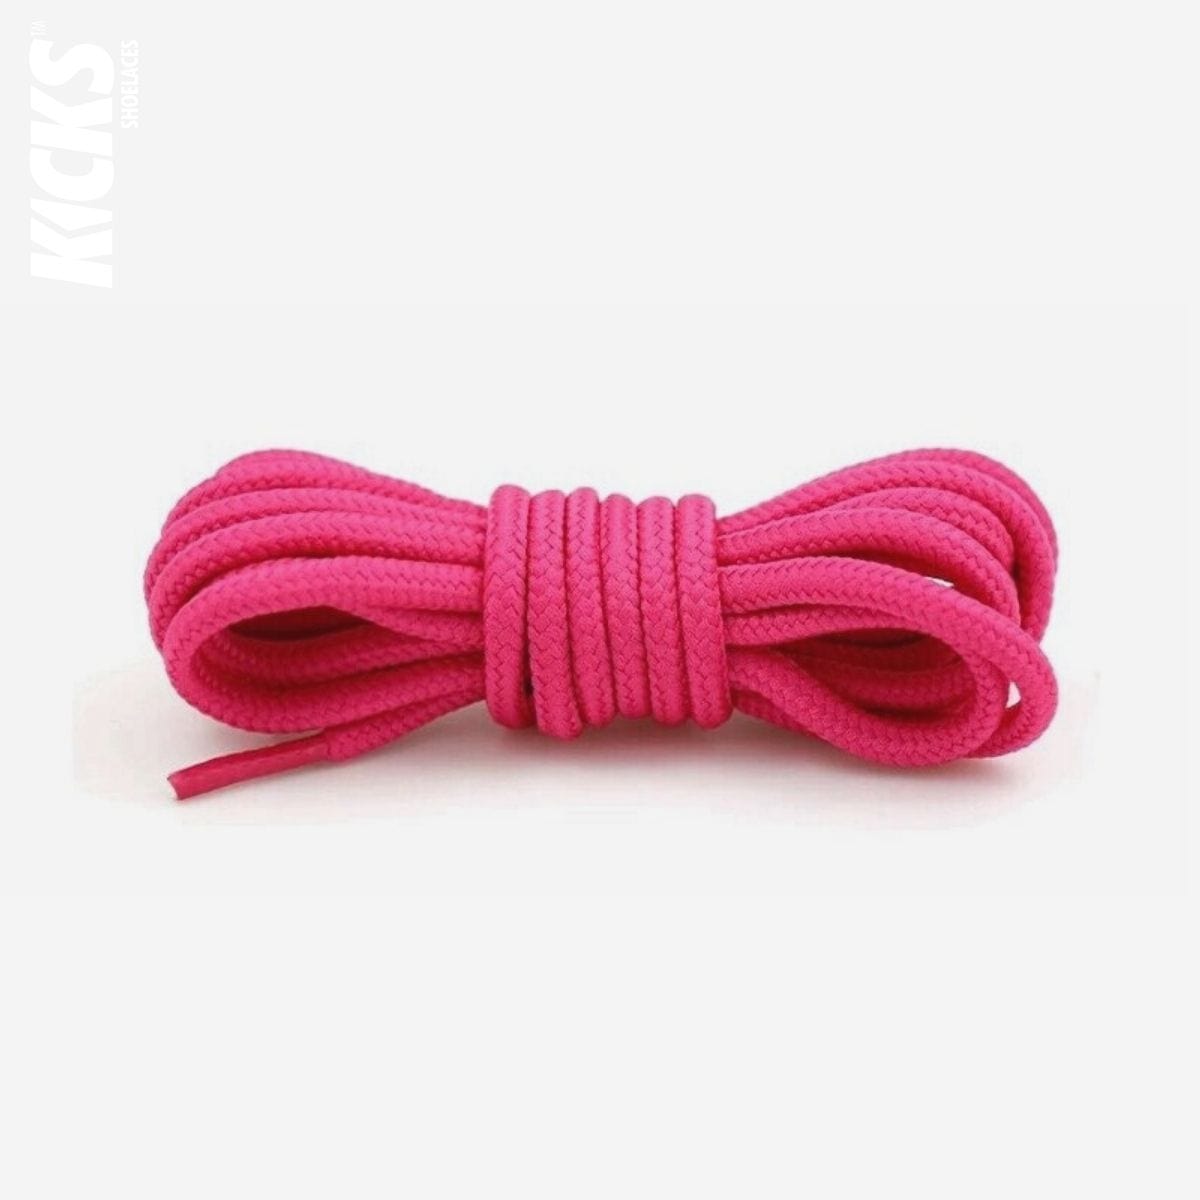 colored-shoelaces-for-cool-ways-to-tie-shoe-with-rose-pink-laces